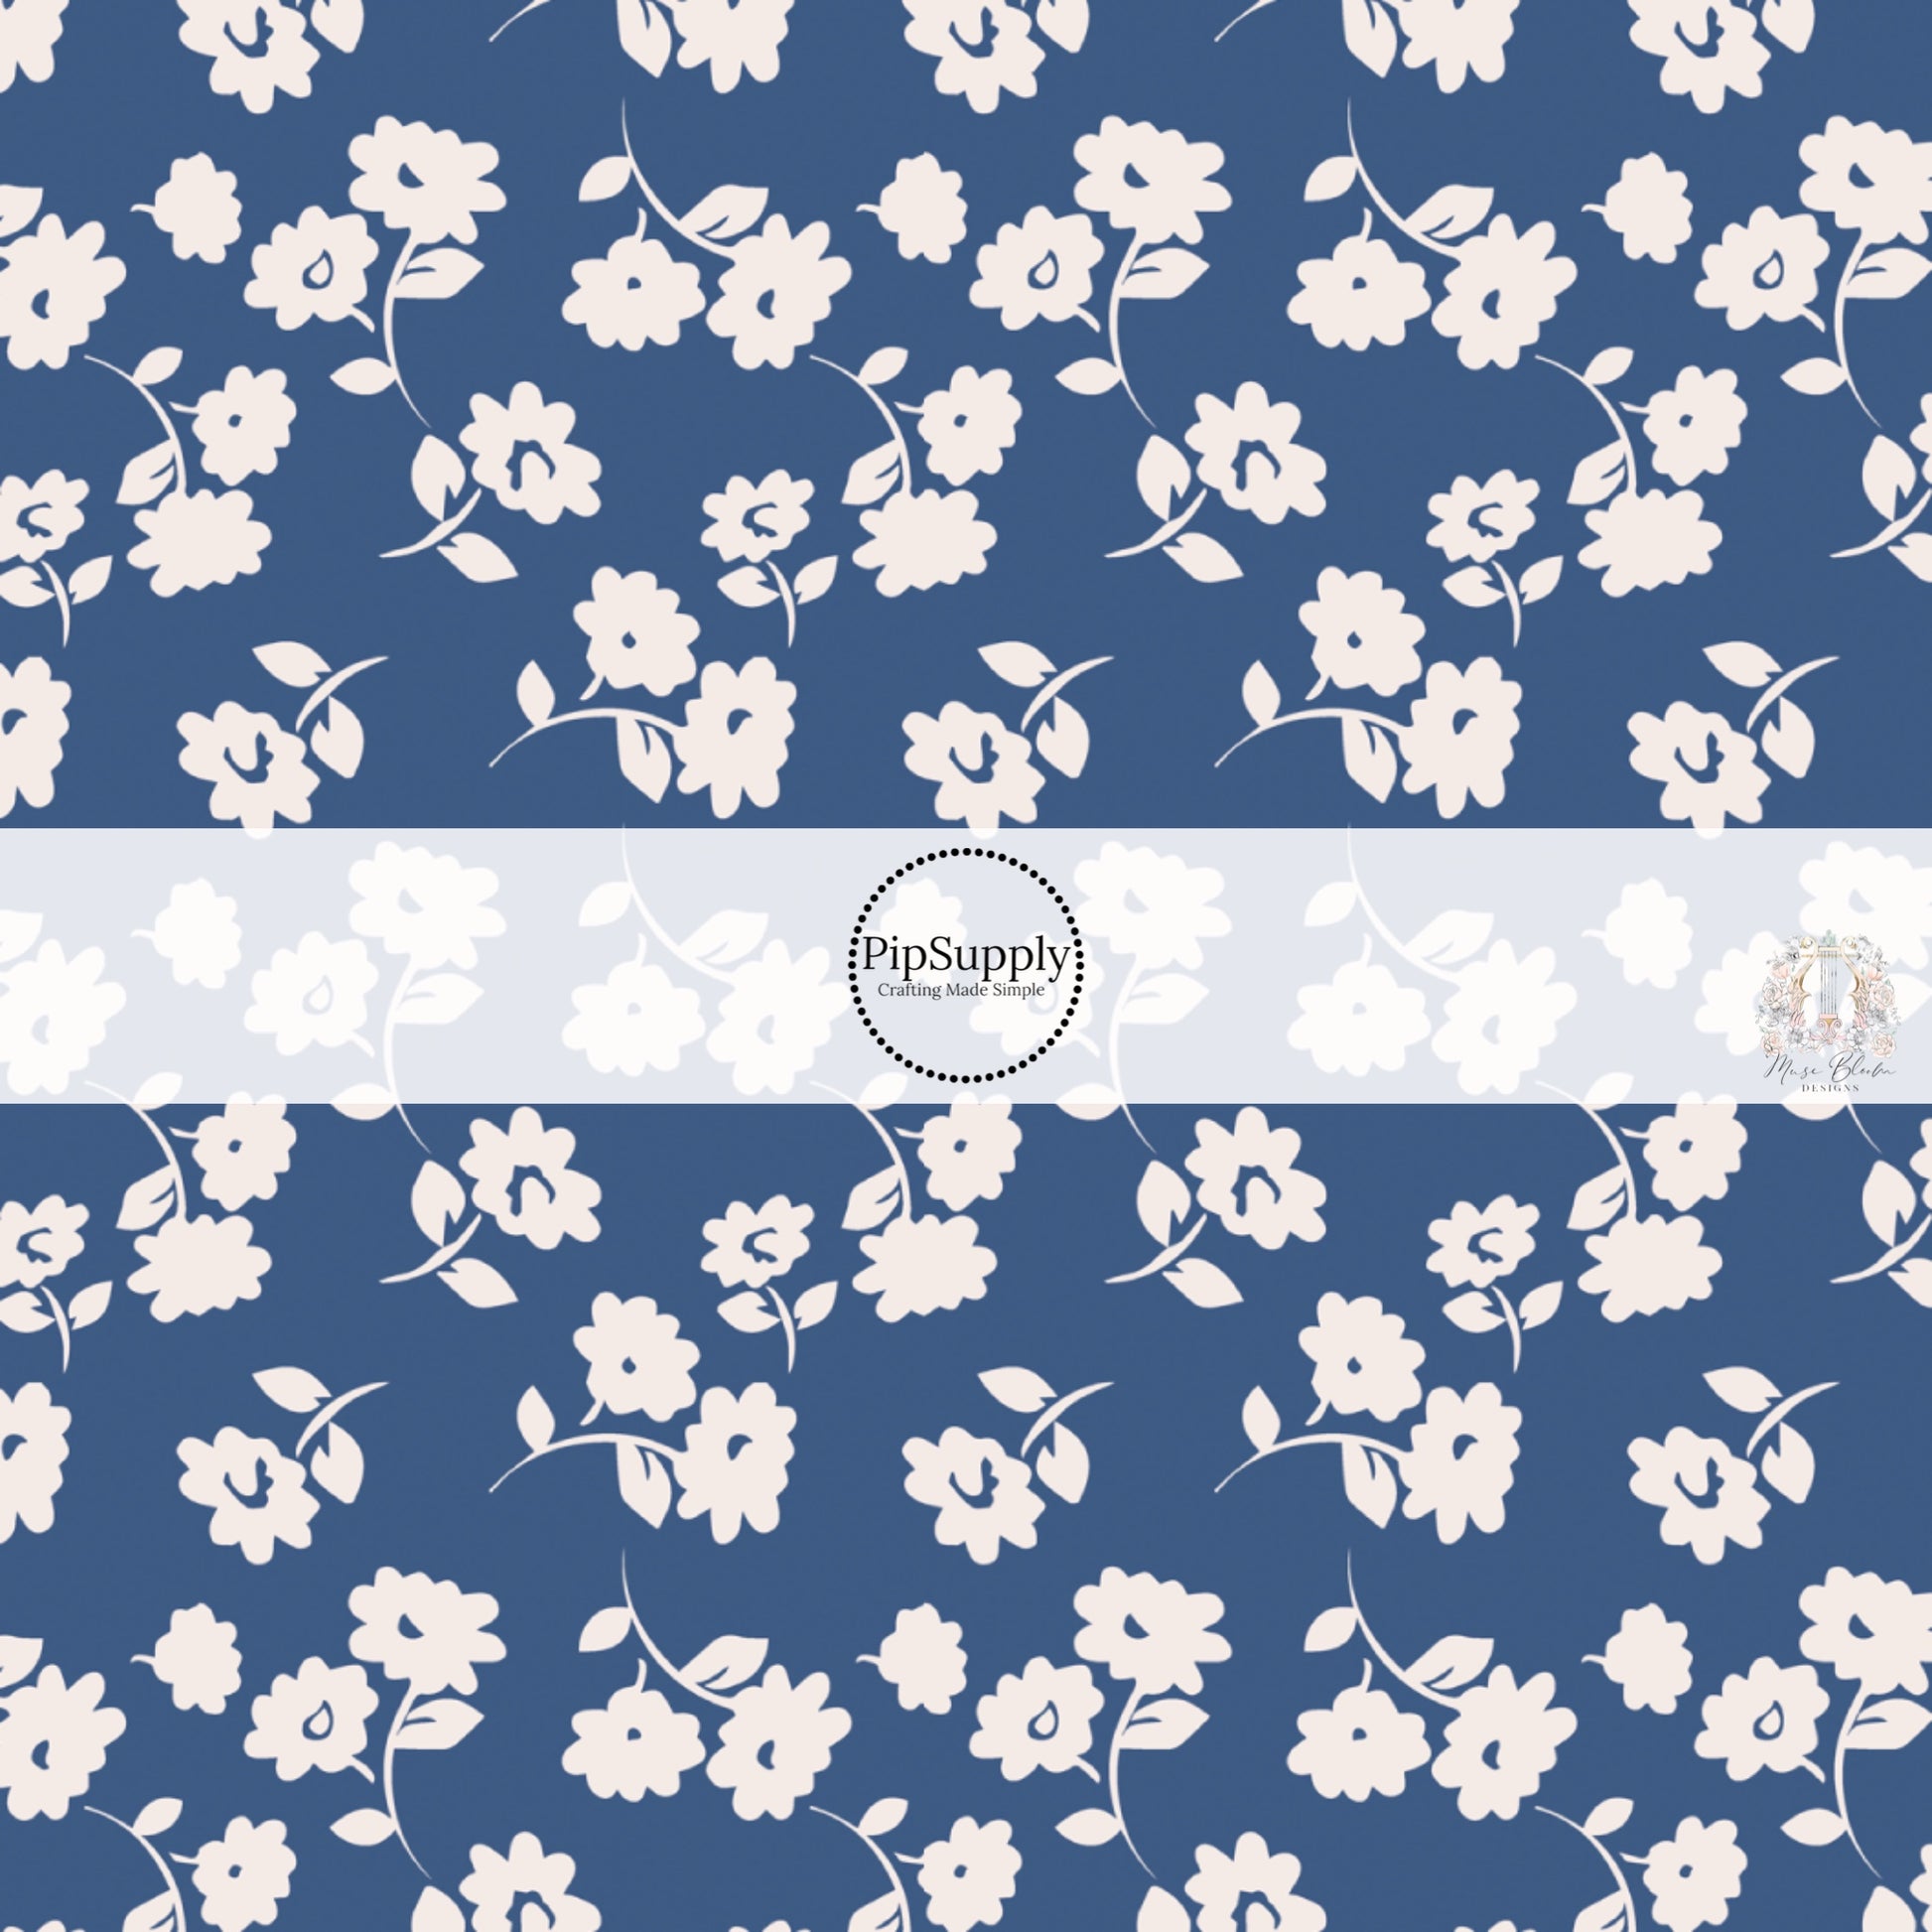 These floral themed dark blue fabric by the yard features light cream flowers on navy blue. This fun summer floral themed fabric can be used for all your sewing and crafting needs! 